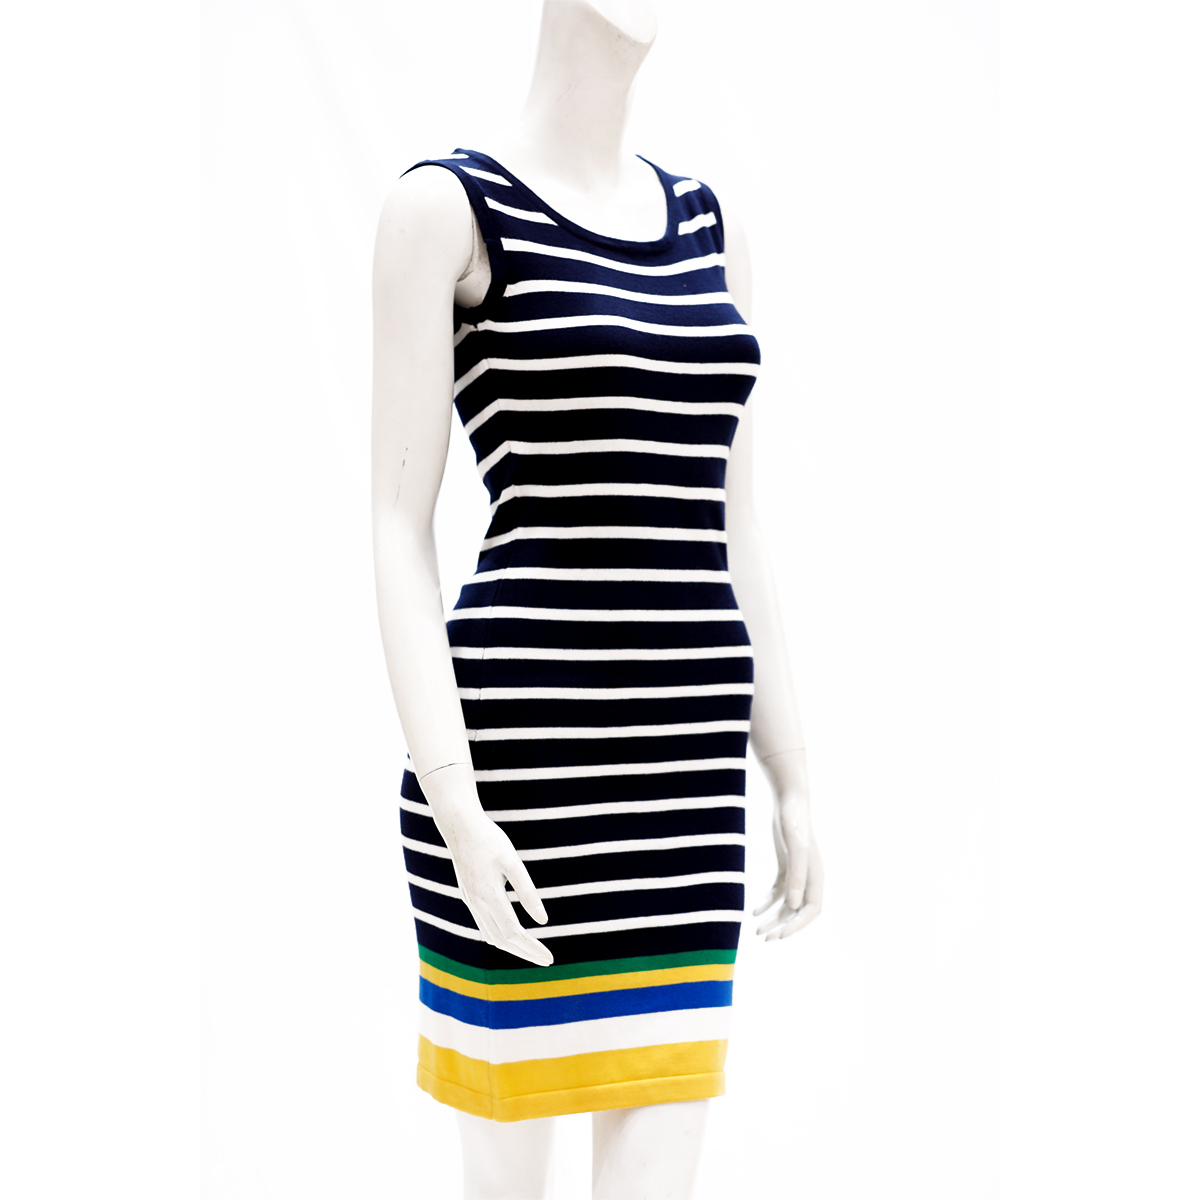 Sculler For Her Sleevless Sheath Knit Dress With Horizontal Stripes-Navy